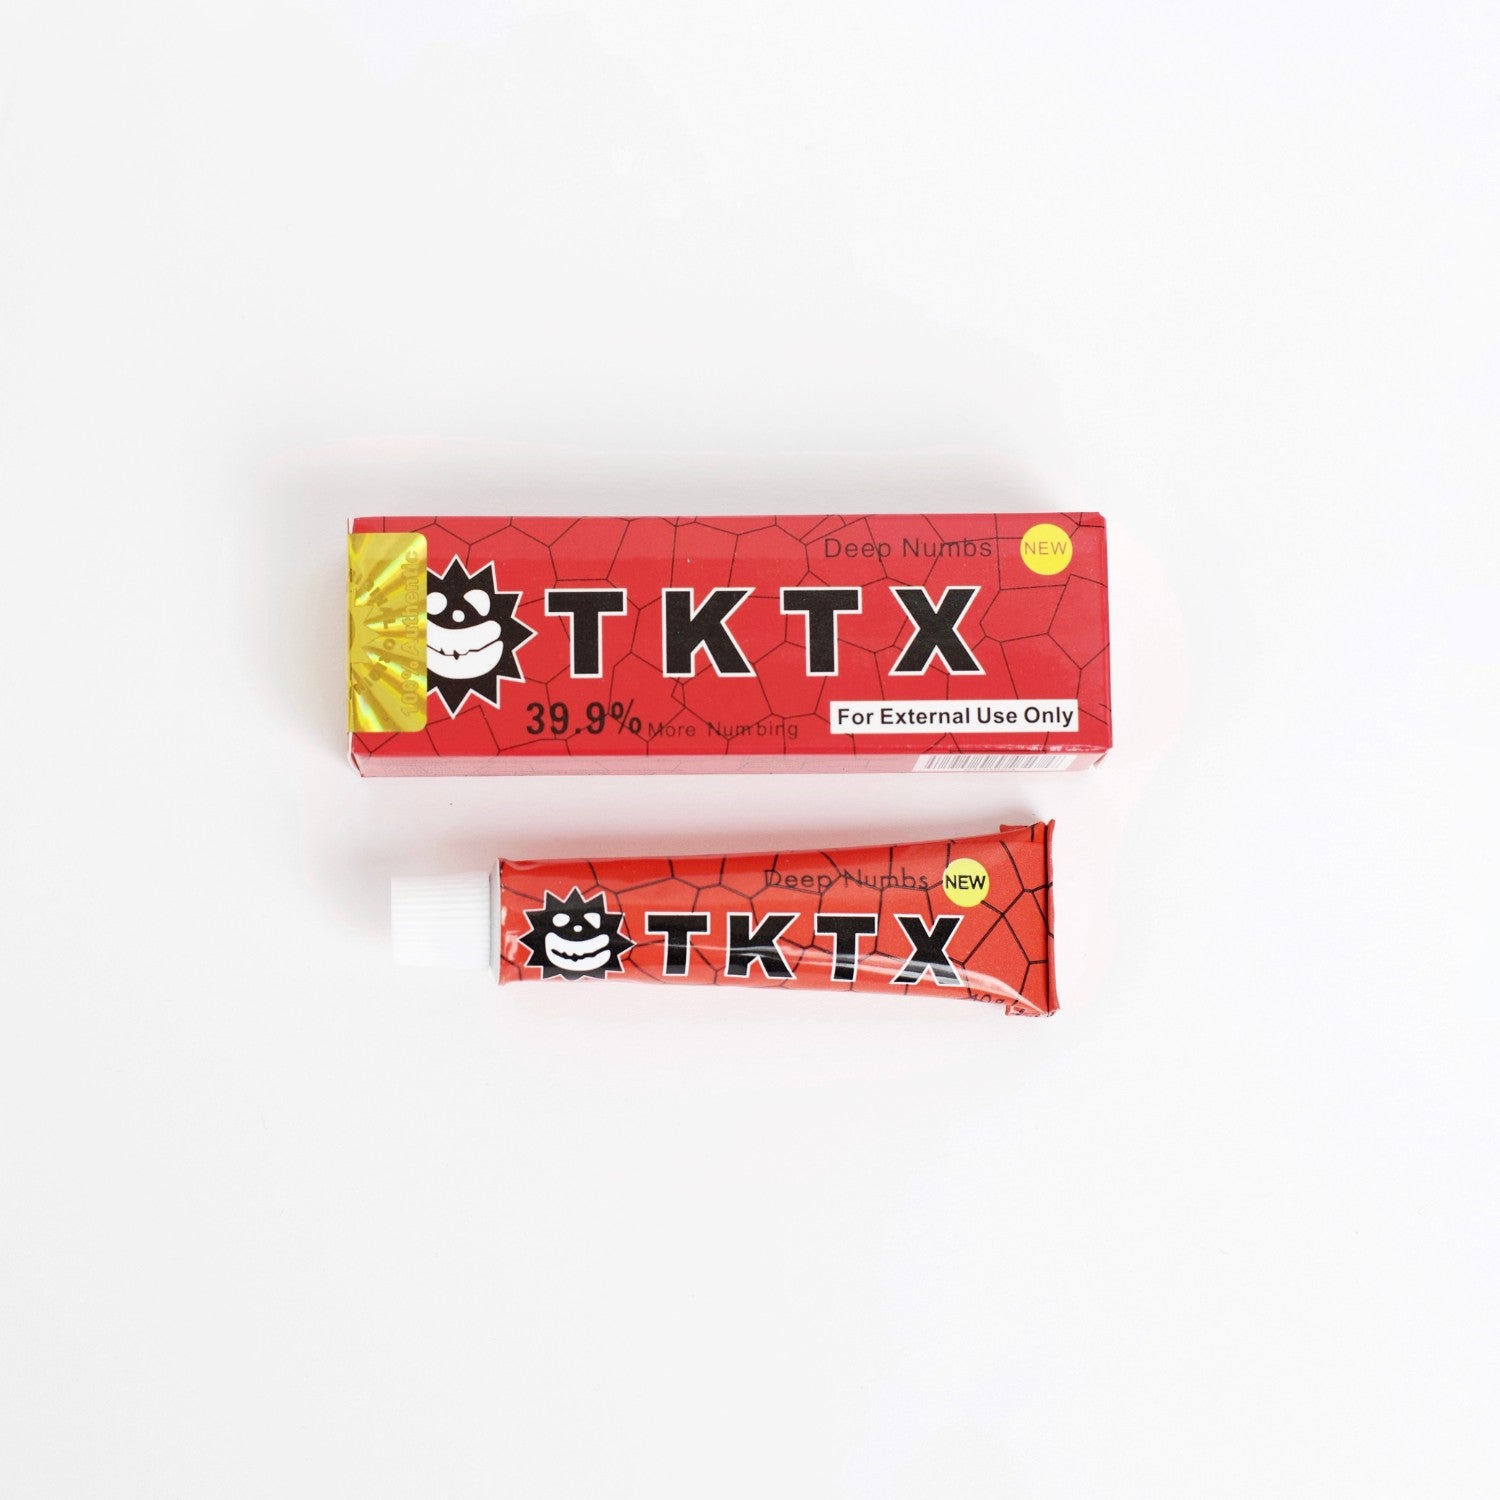 TKTX Numbing Cream for permanent makeup with packaging